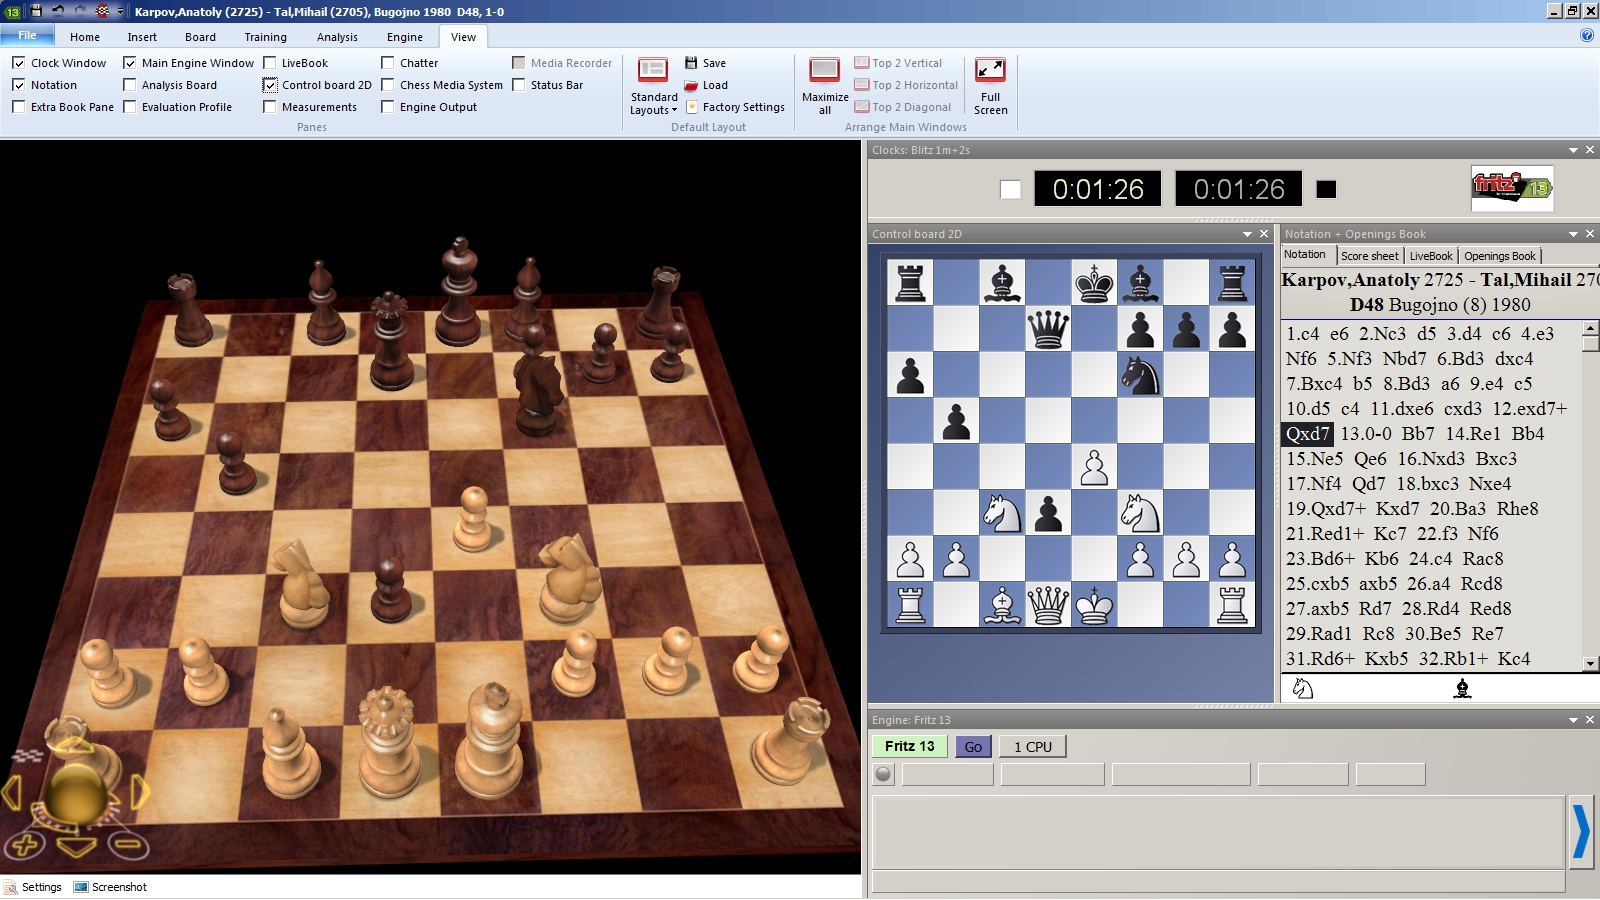 The “Compare” chess analysis function in Fritz 13